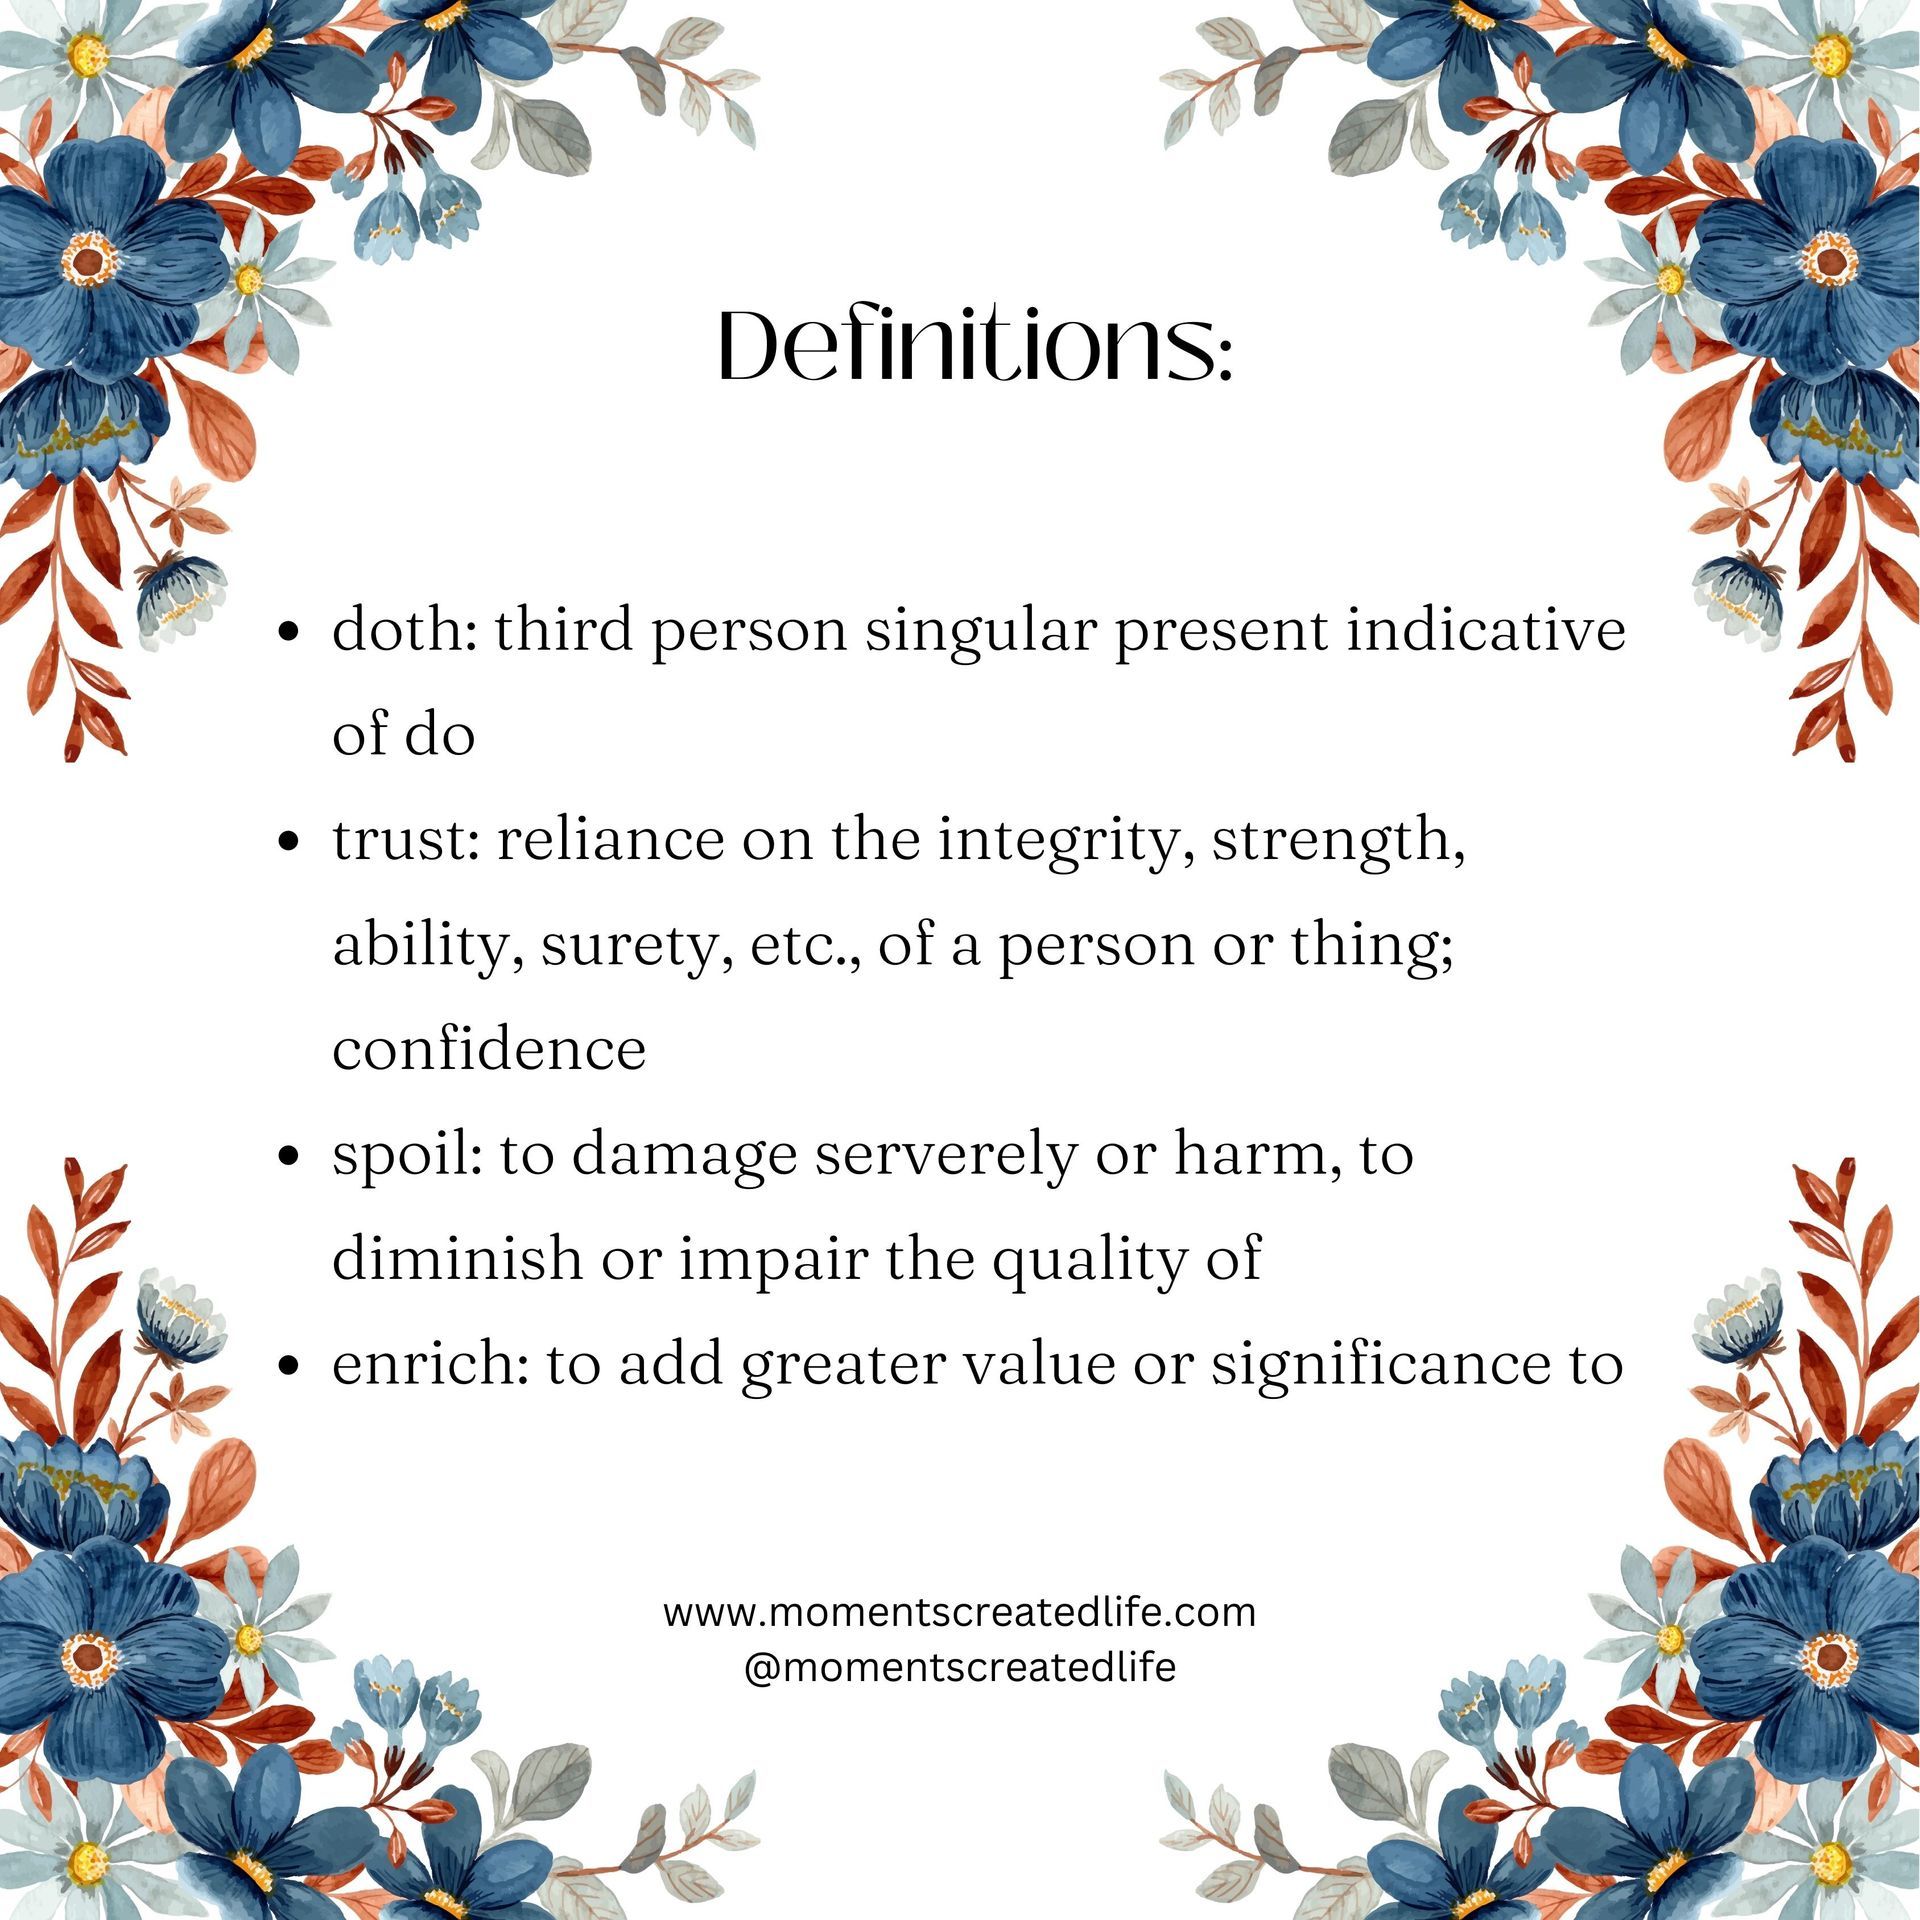 Definitions of doth, trust, spoil and enrich.